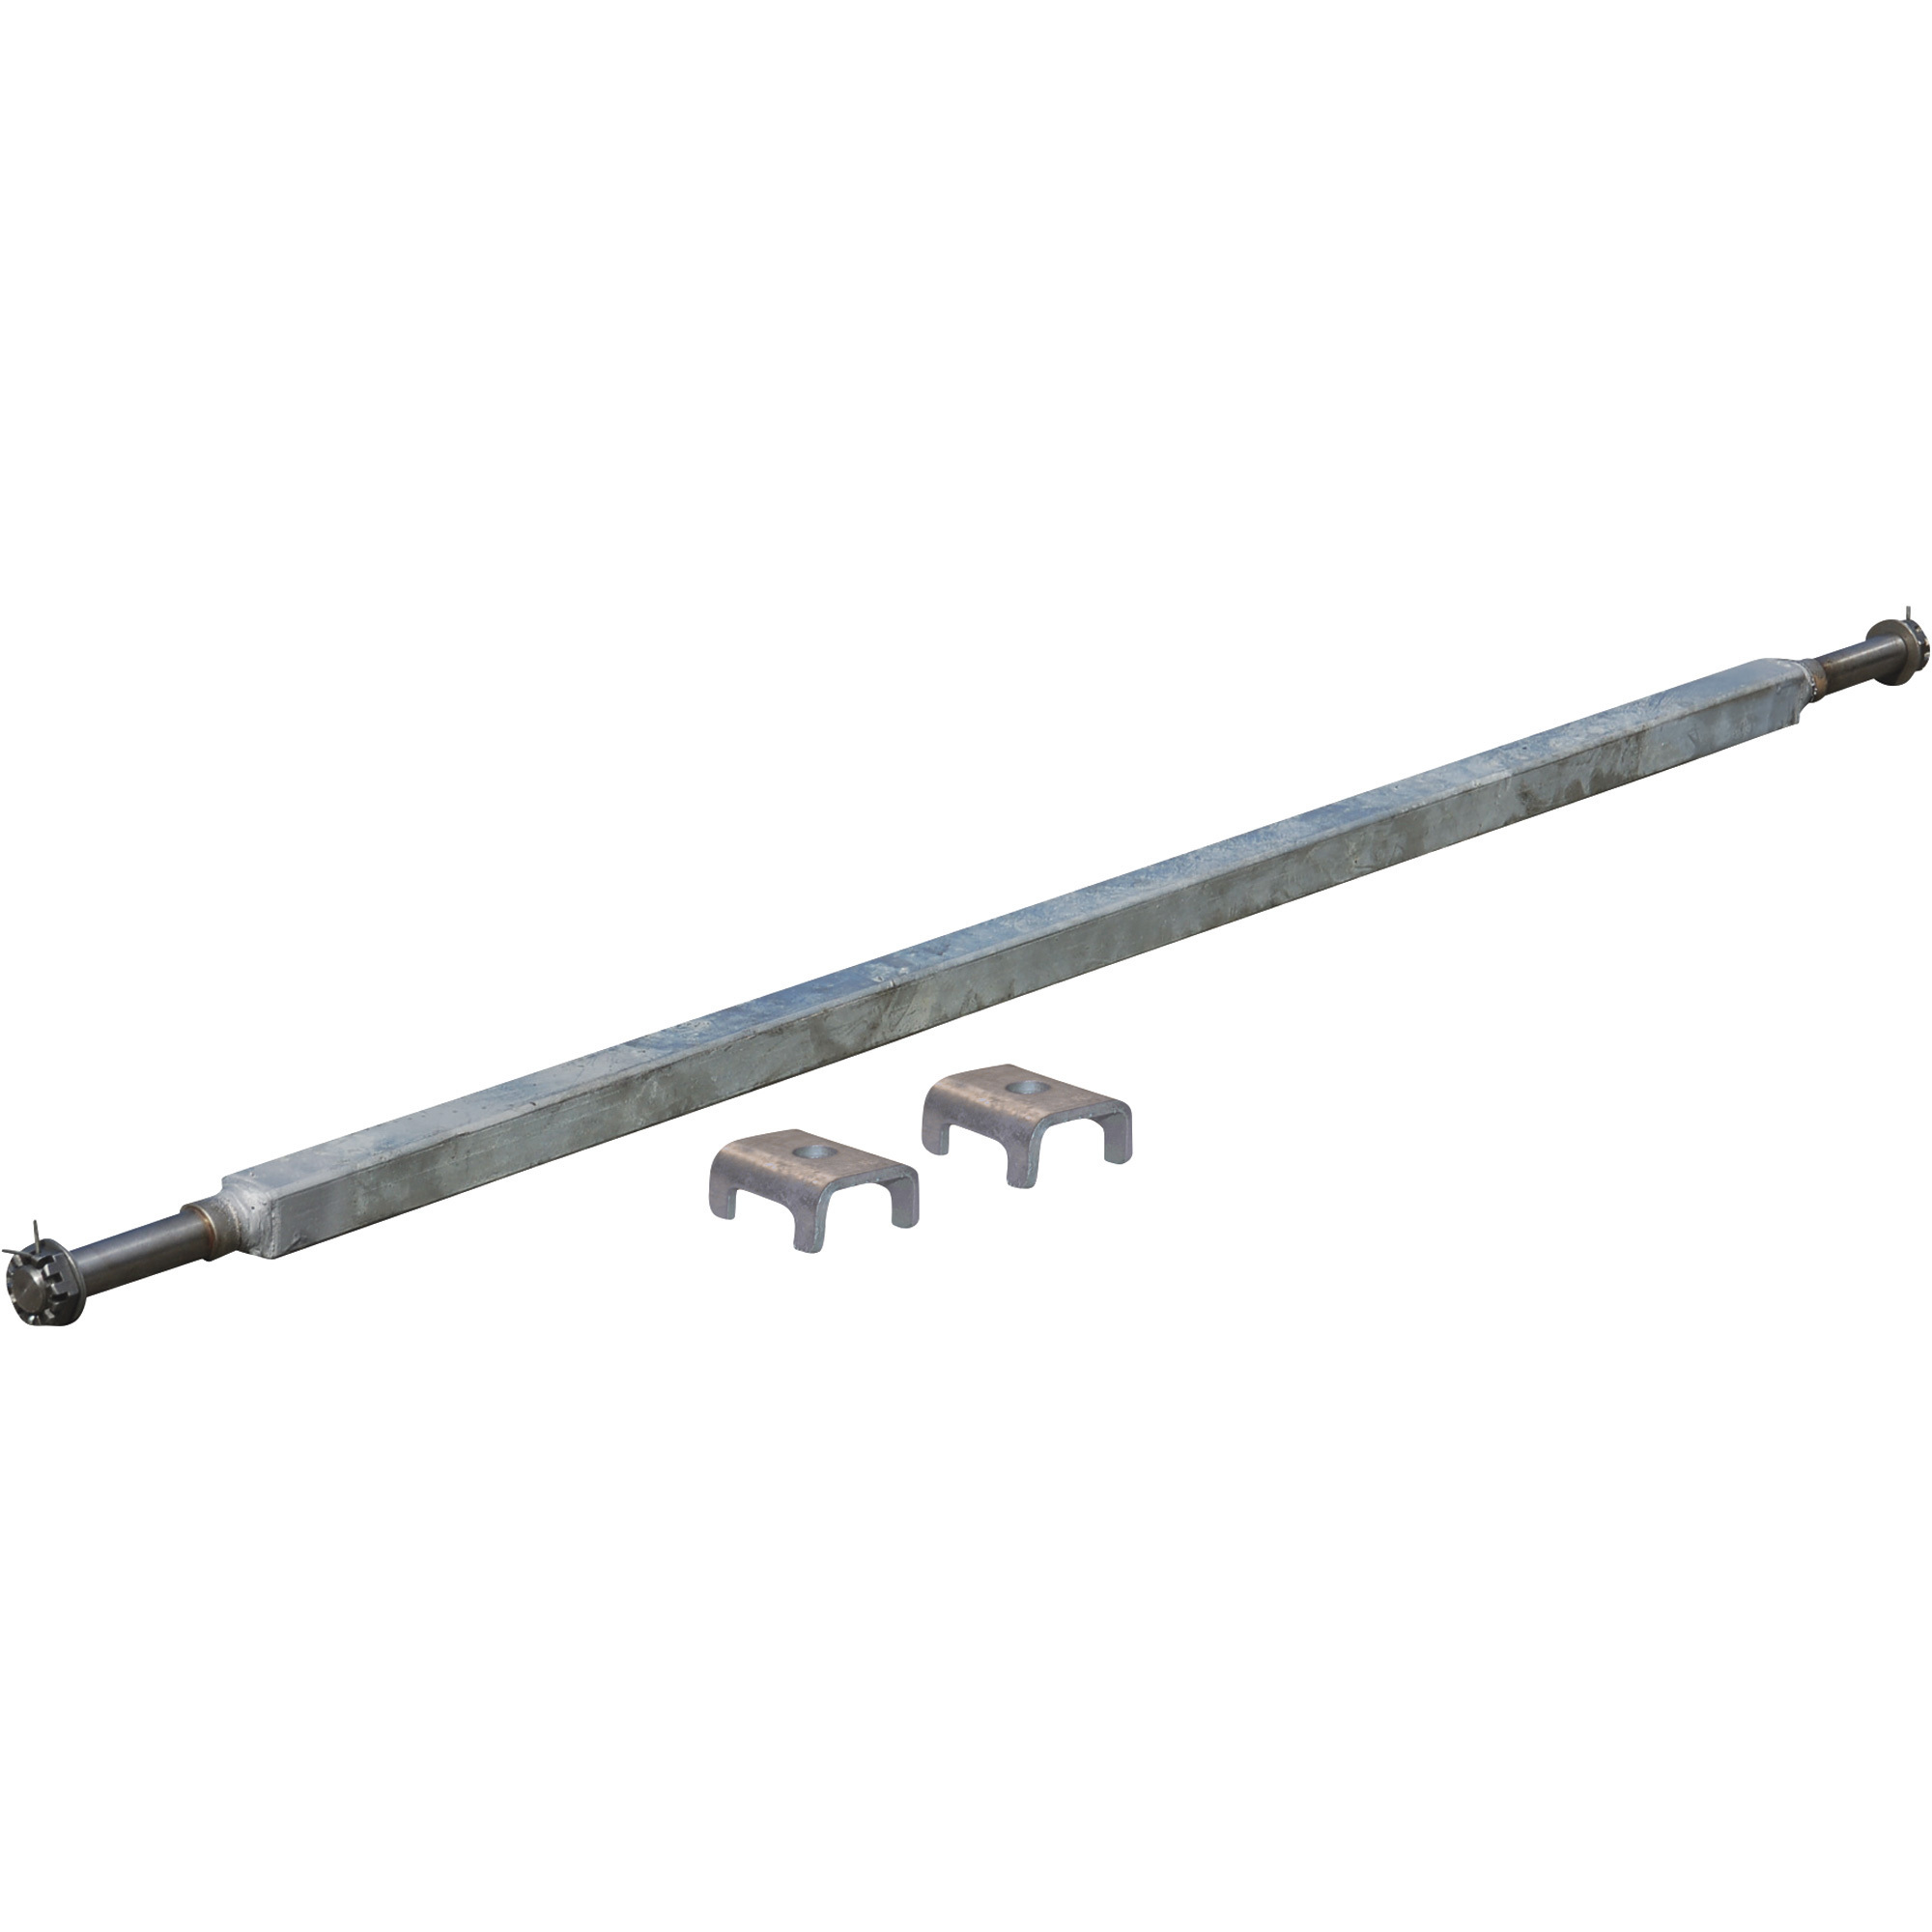 Ultra-Tow 2000-Lb. Capacity Spring Trailer Axle with Adjustable Spring Mounts, 59 1/2Inch Hubface, 43Inch-49Inch Spring Center, 64 1/2Inch L, Straight